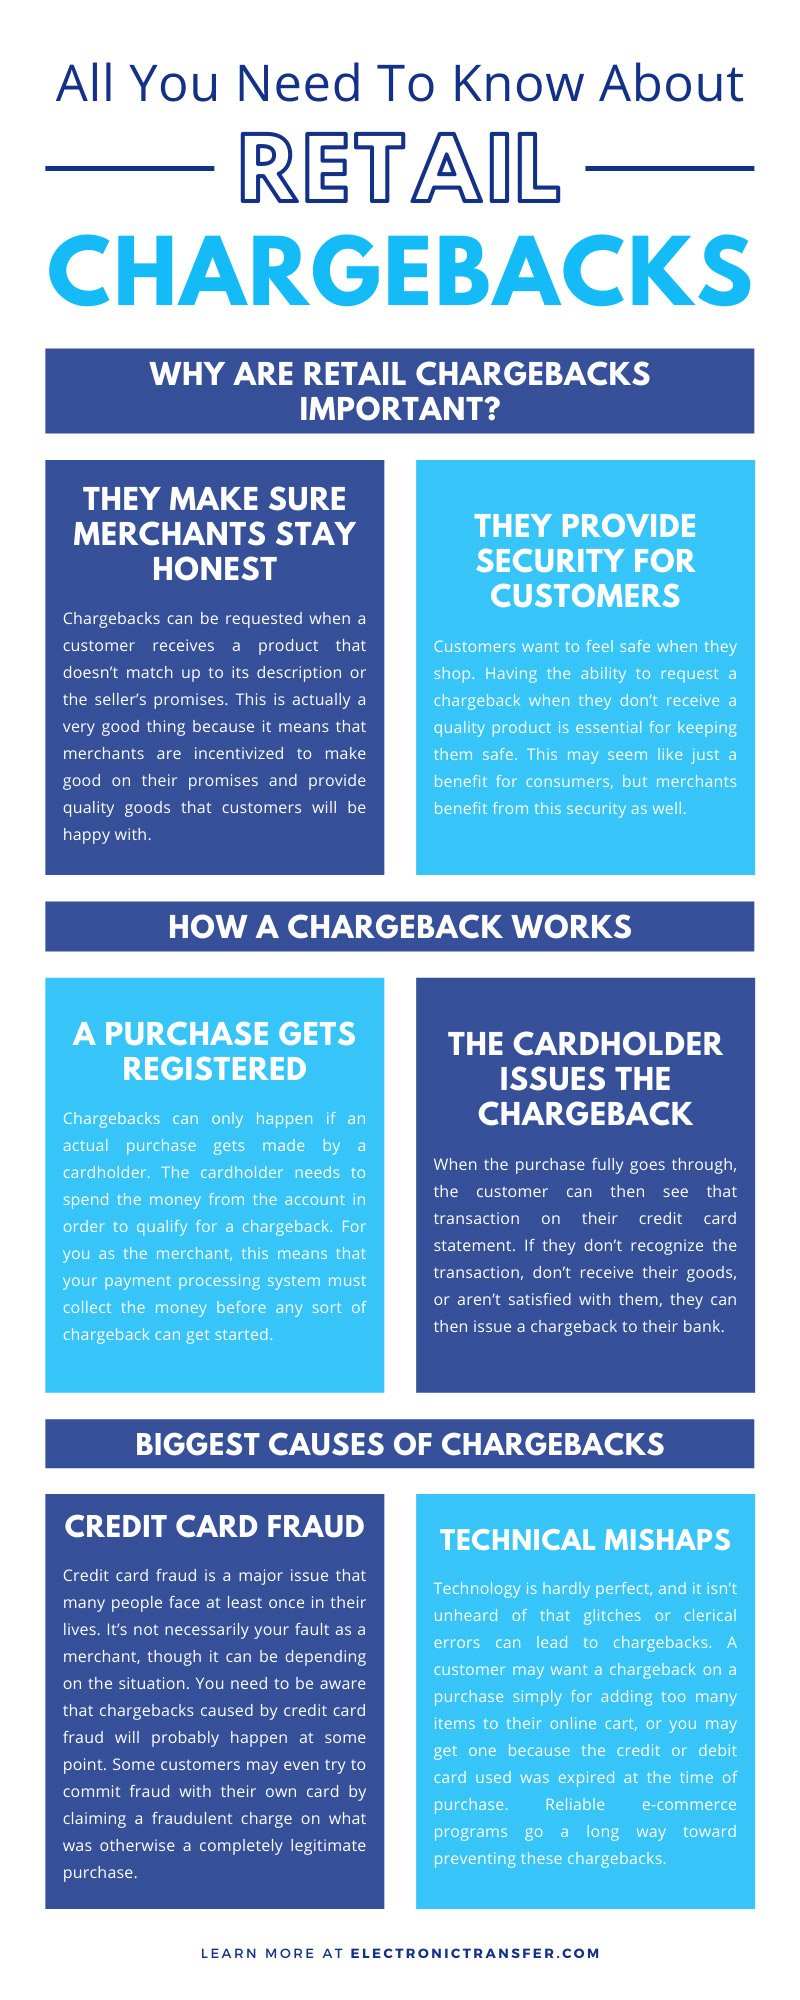 All You Need To Know About Retail Chargebacks